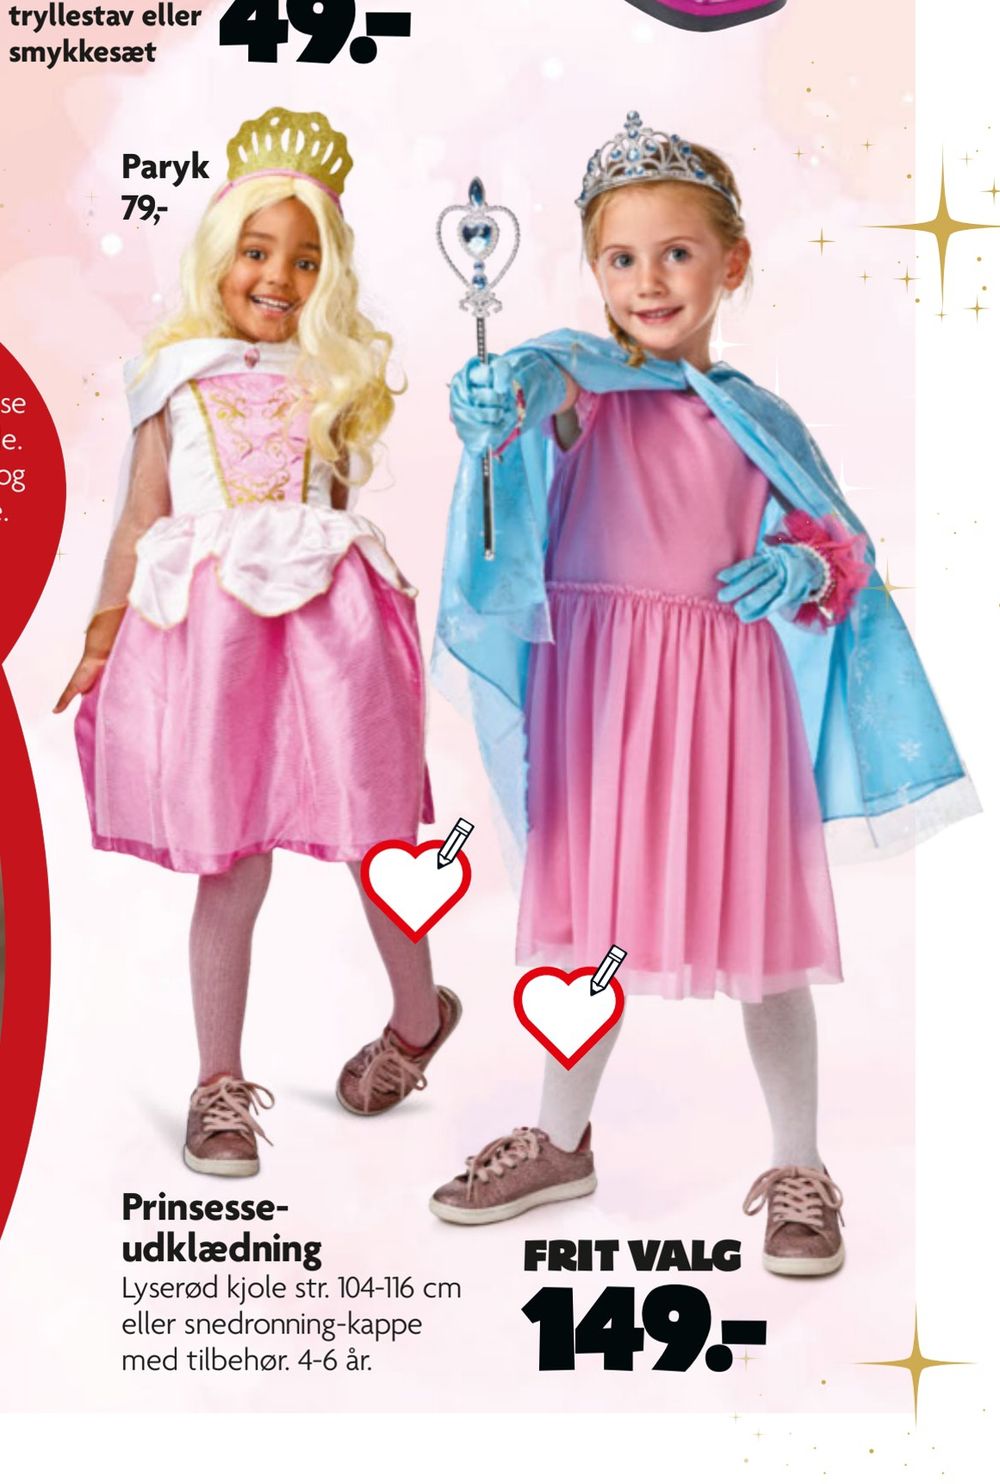 Deals on Prinsesseudklædning from BR at 149 kr.